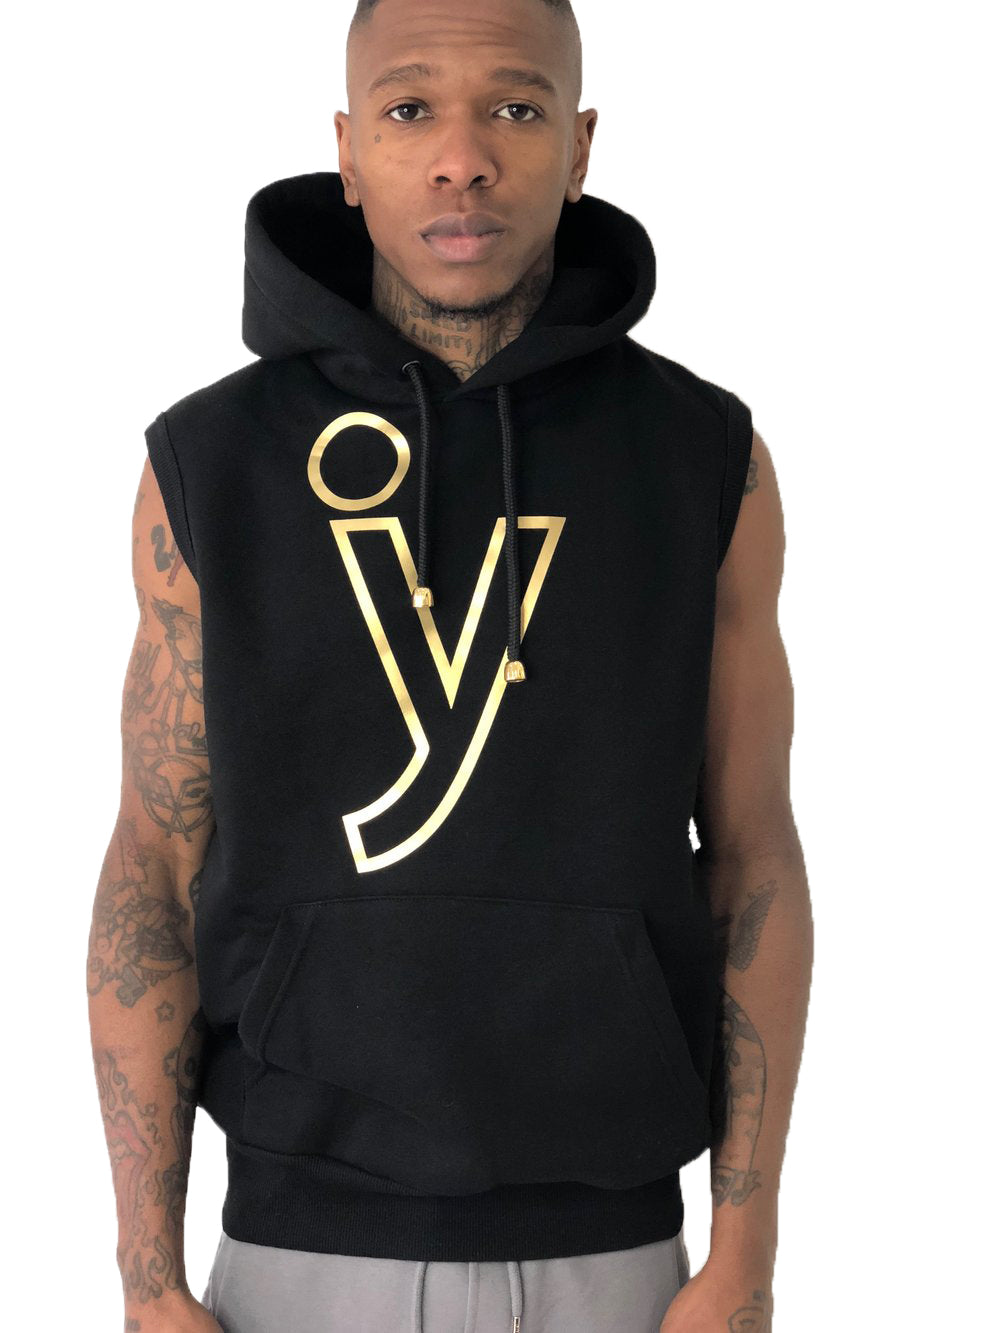 Black Sleeveless Hoodie by iacobuccyounes Italy - Brit Boss 